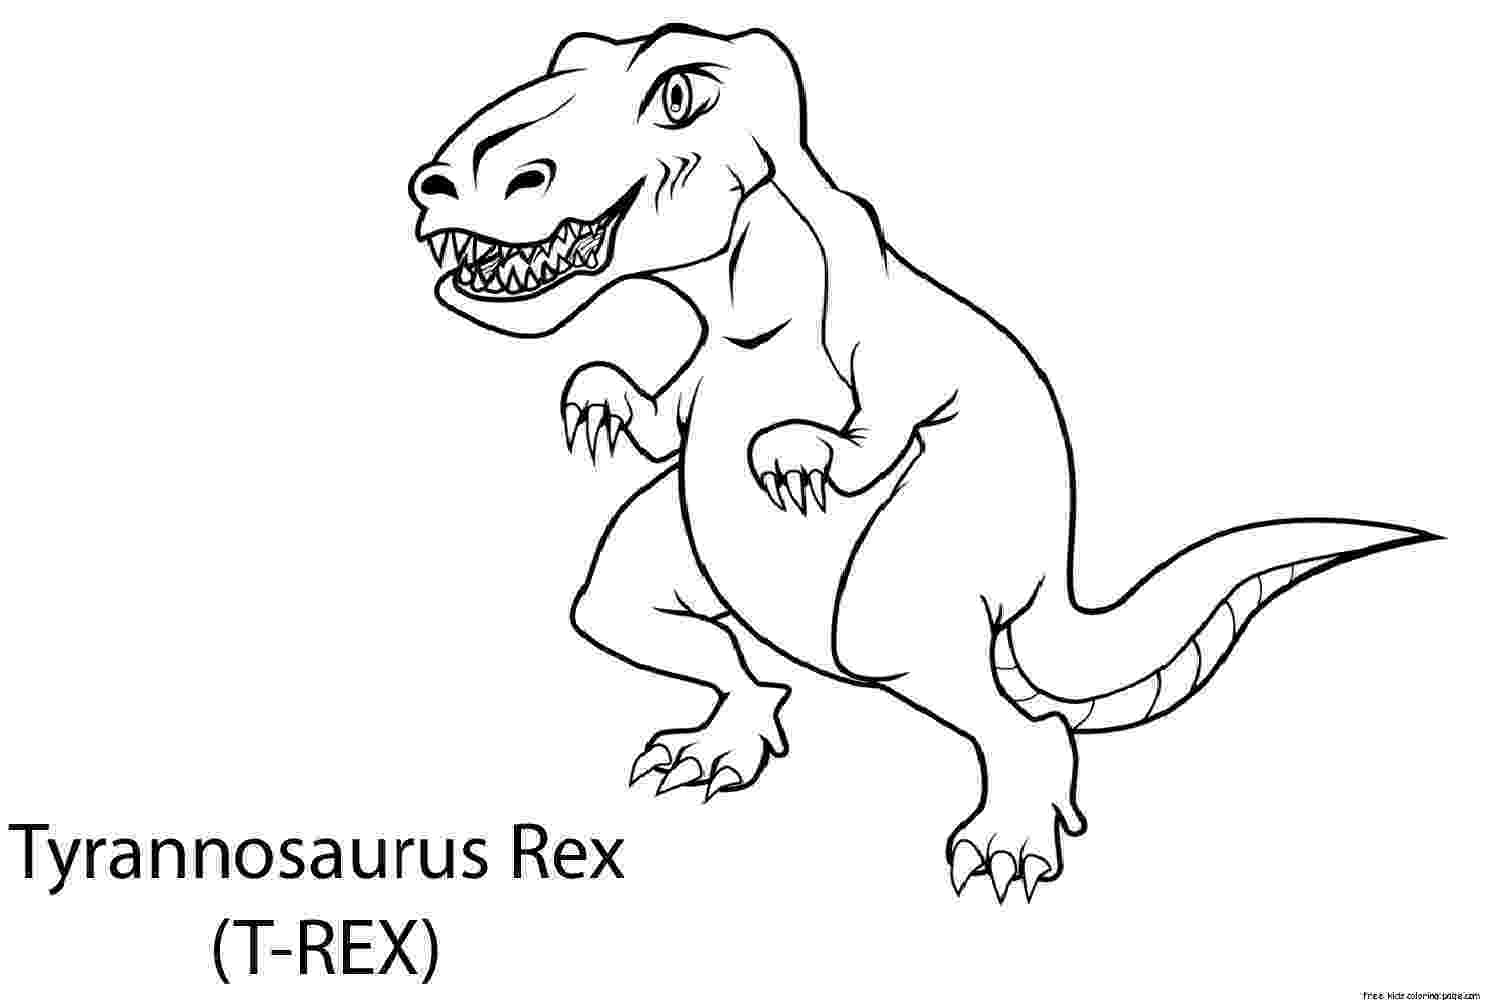 dinosaur images to print dinosaur tyrannosaurus rex coloring book pages for images dinosaur print to 